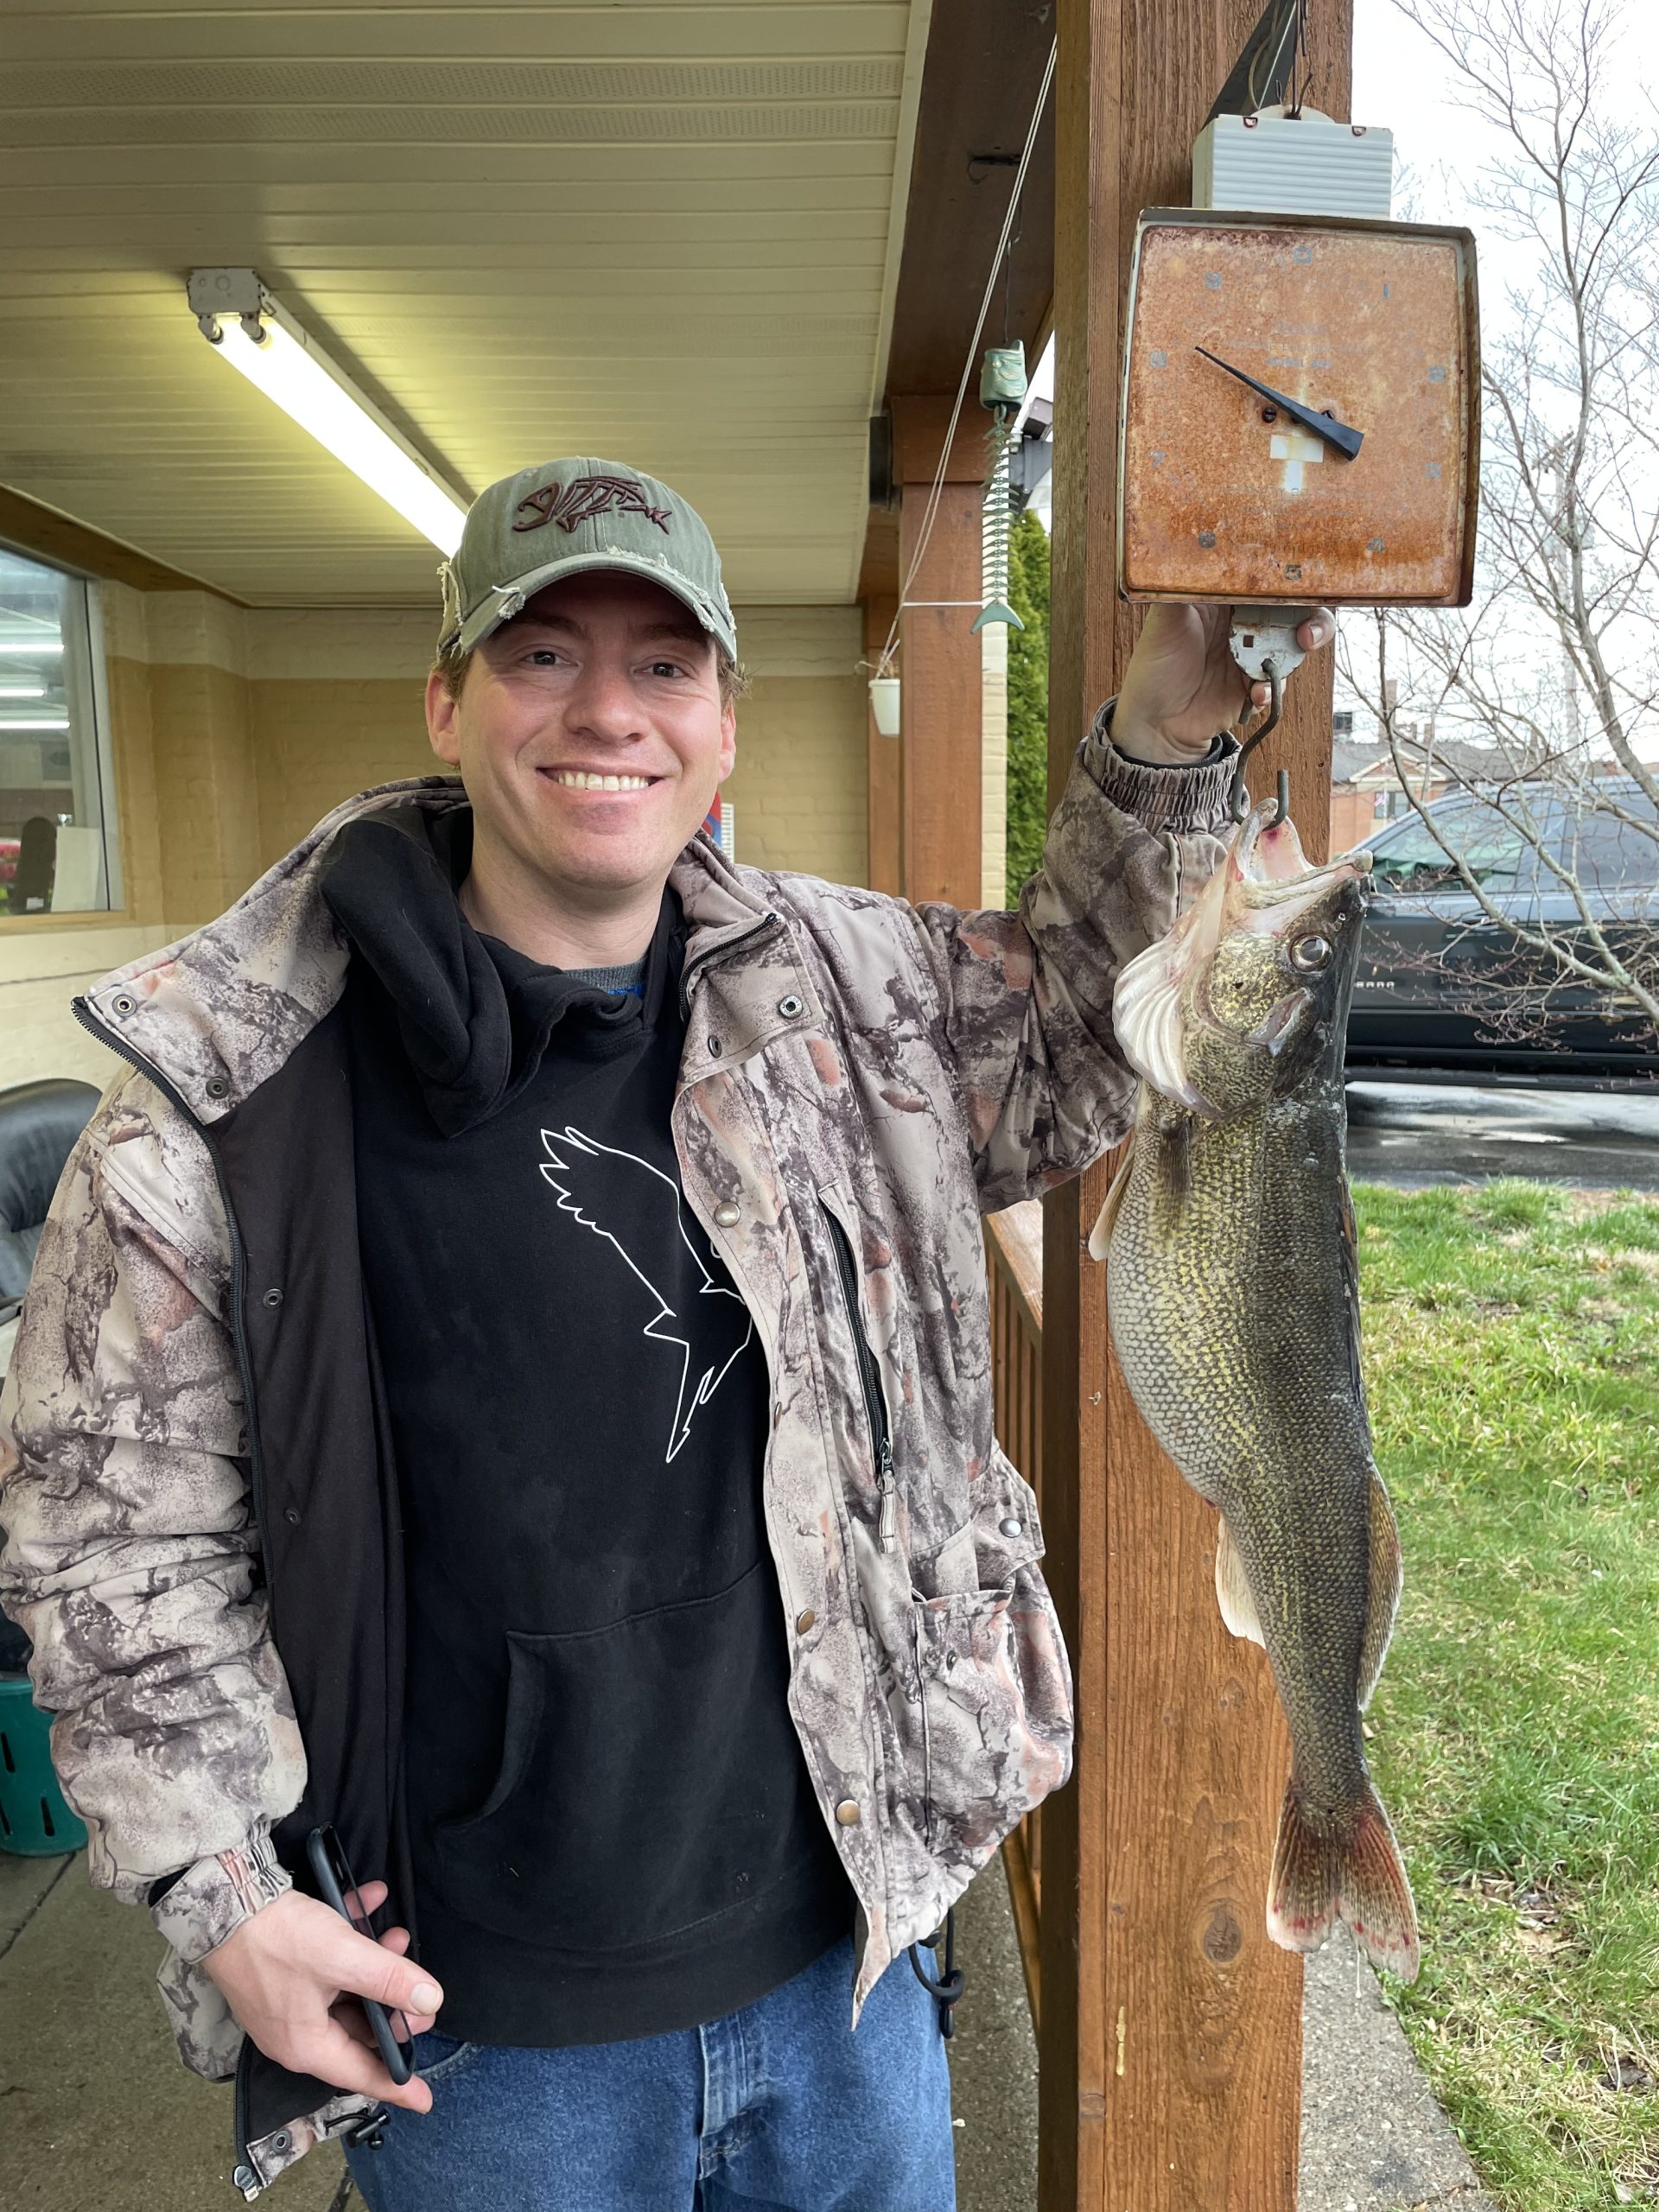 Maumee river report 6 April 2020